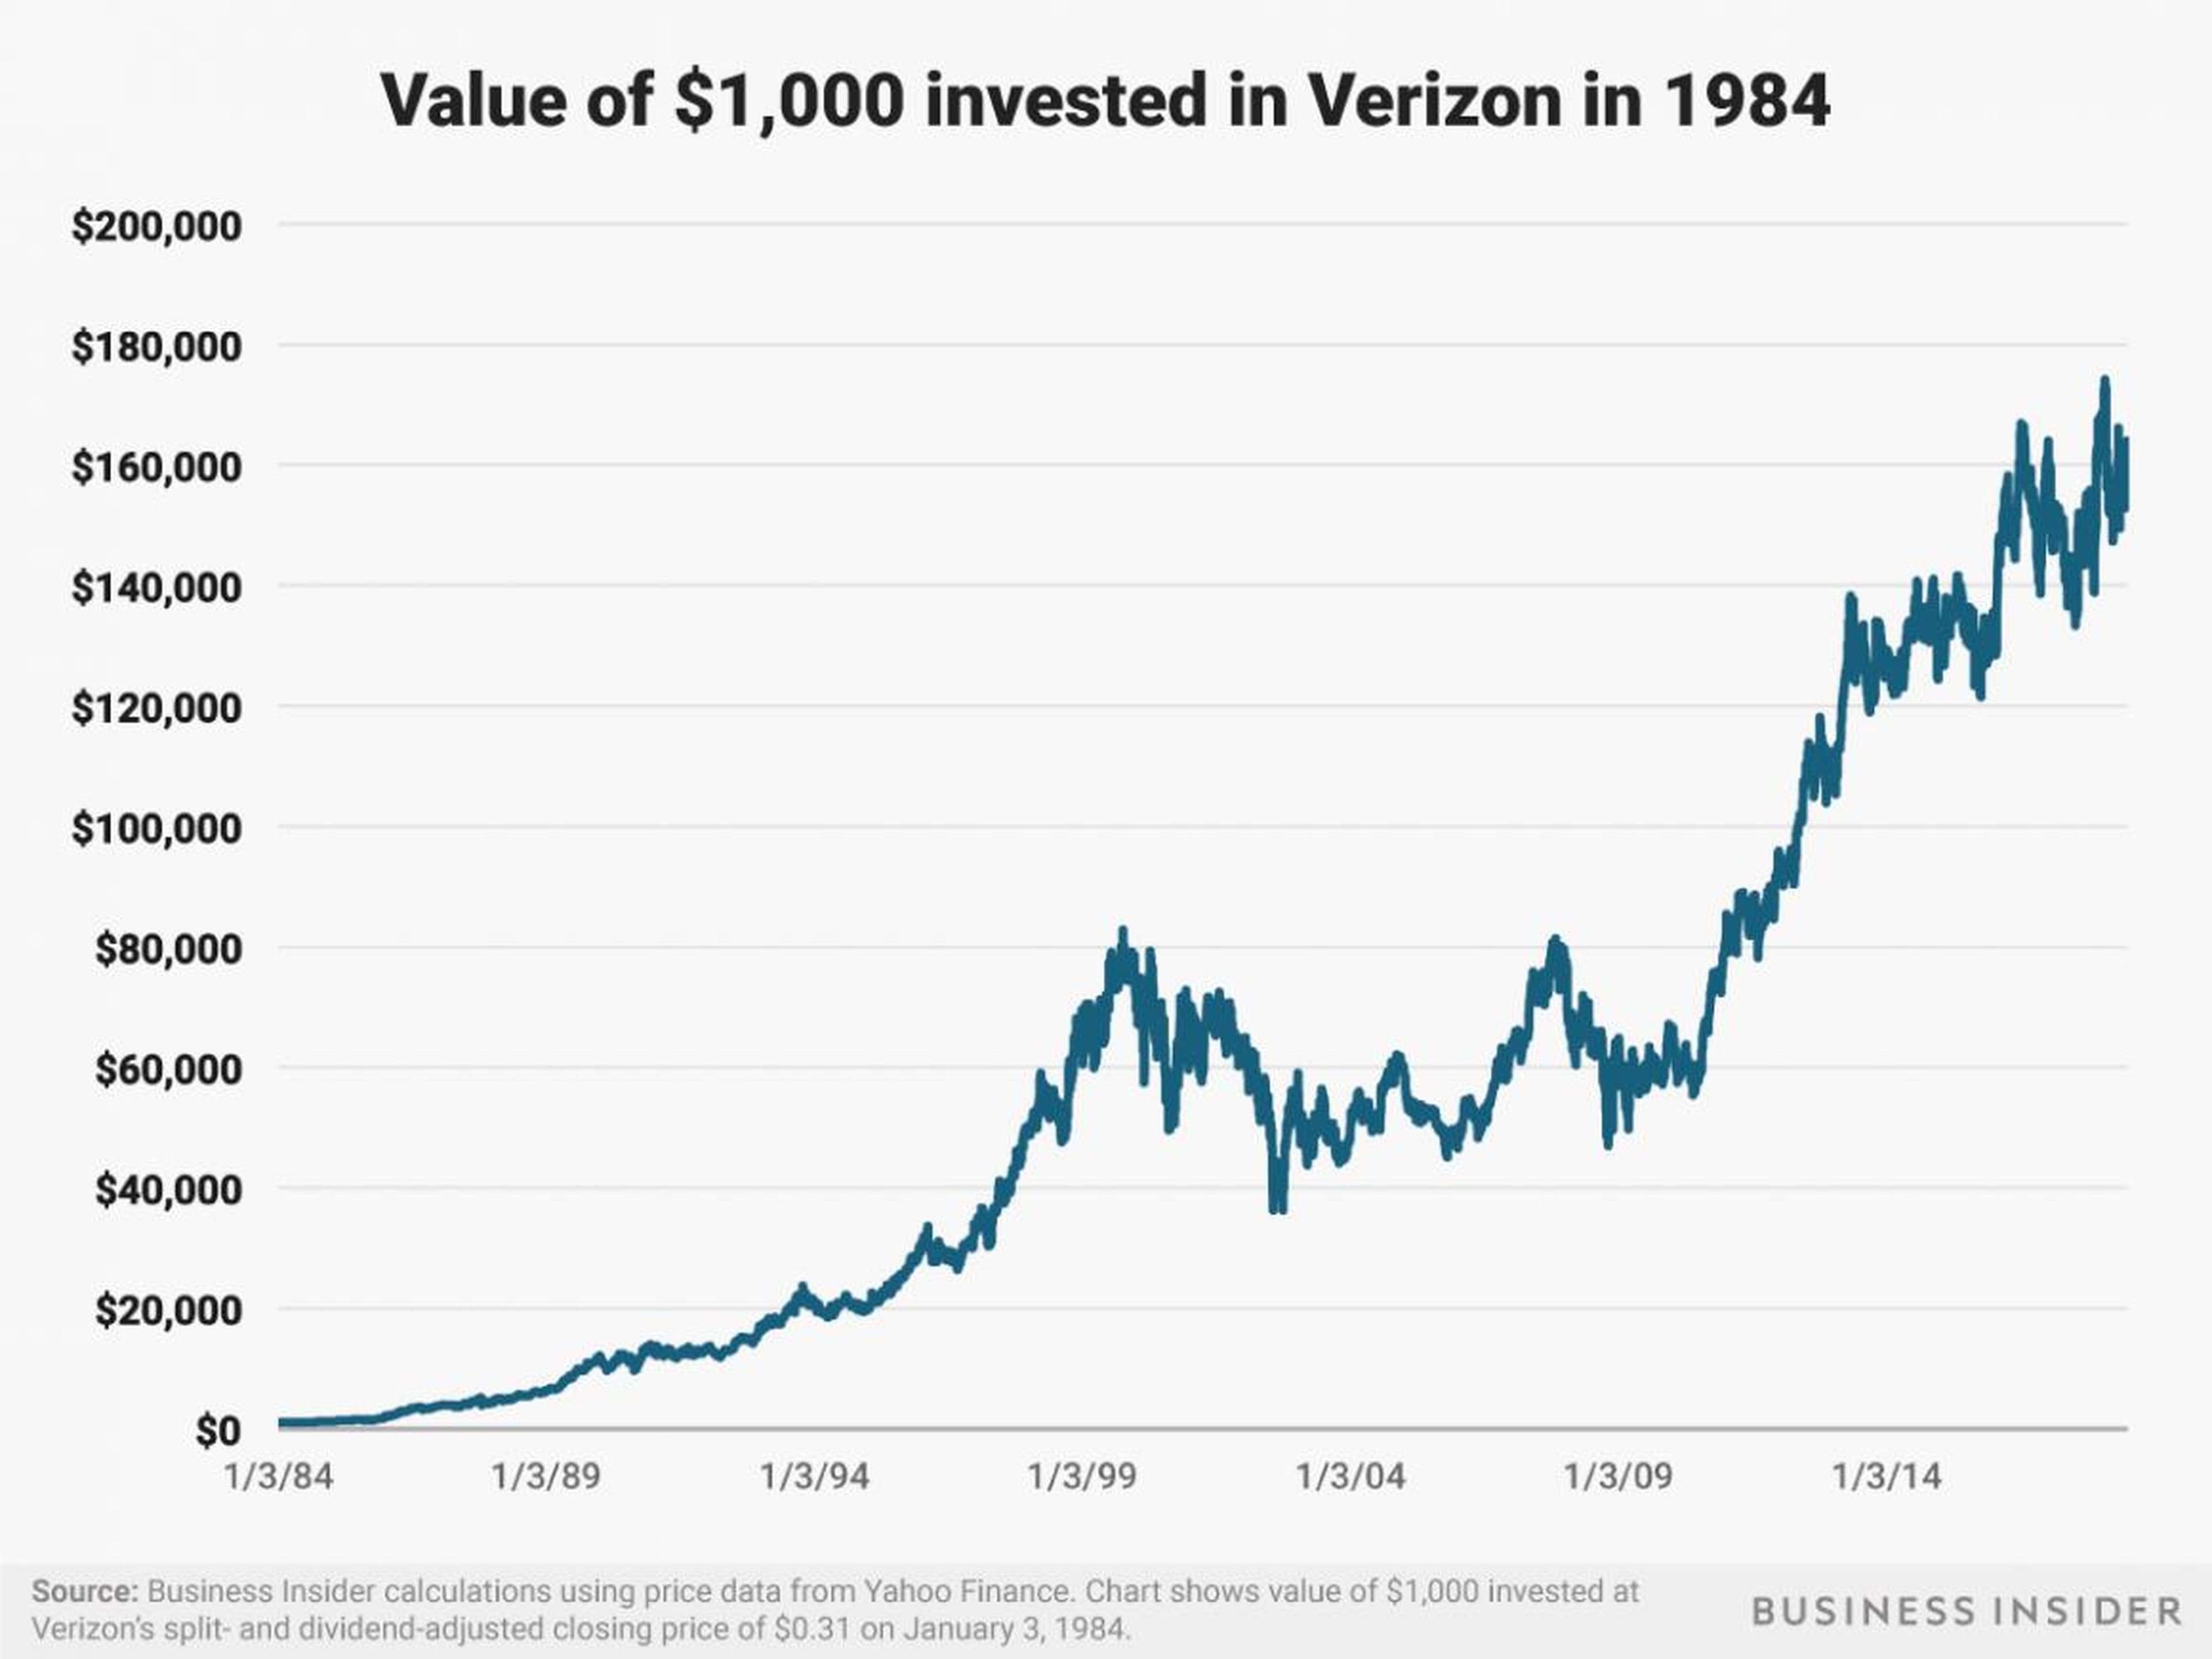 A $1,000 investment in Verizon's predecessor Bell Atlantic at the time of the breakup of the old AT&T system in 1984 would be worth over $160,000 today.